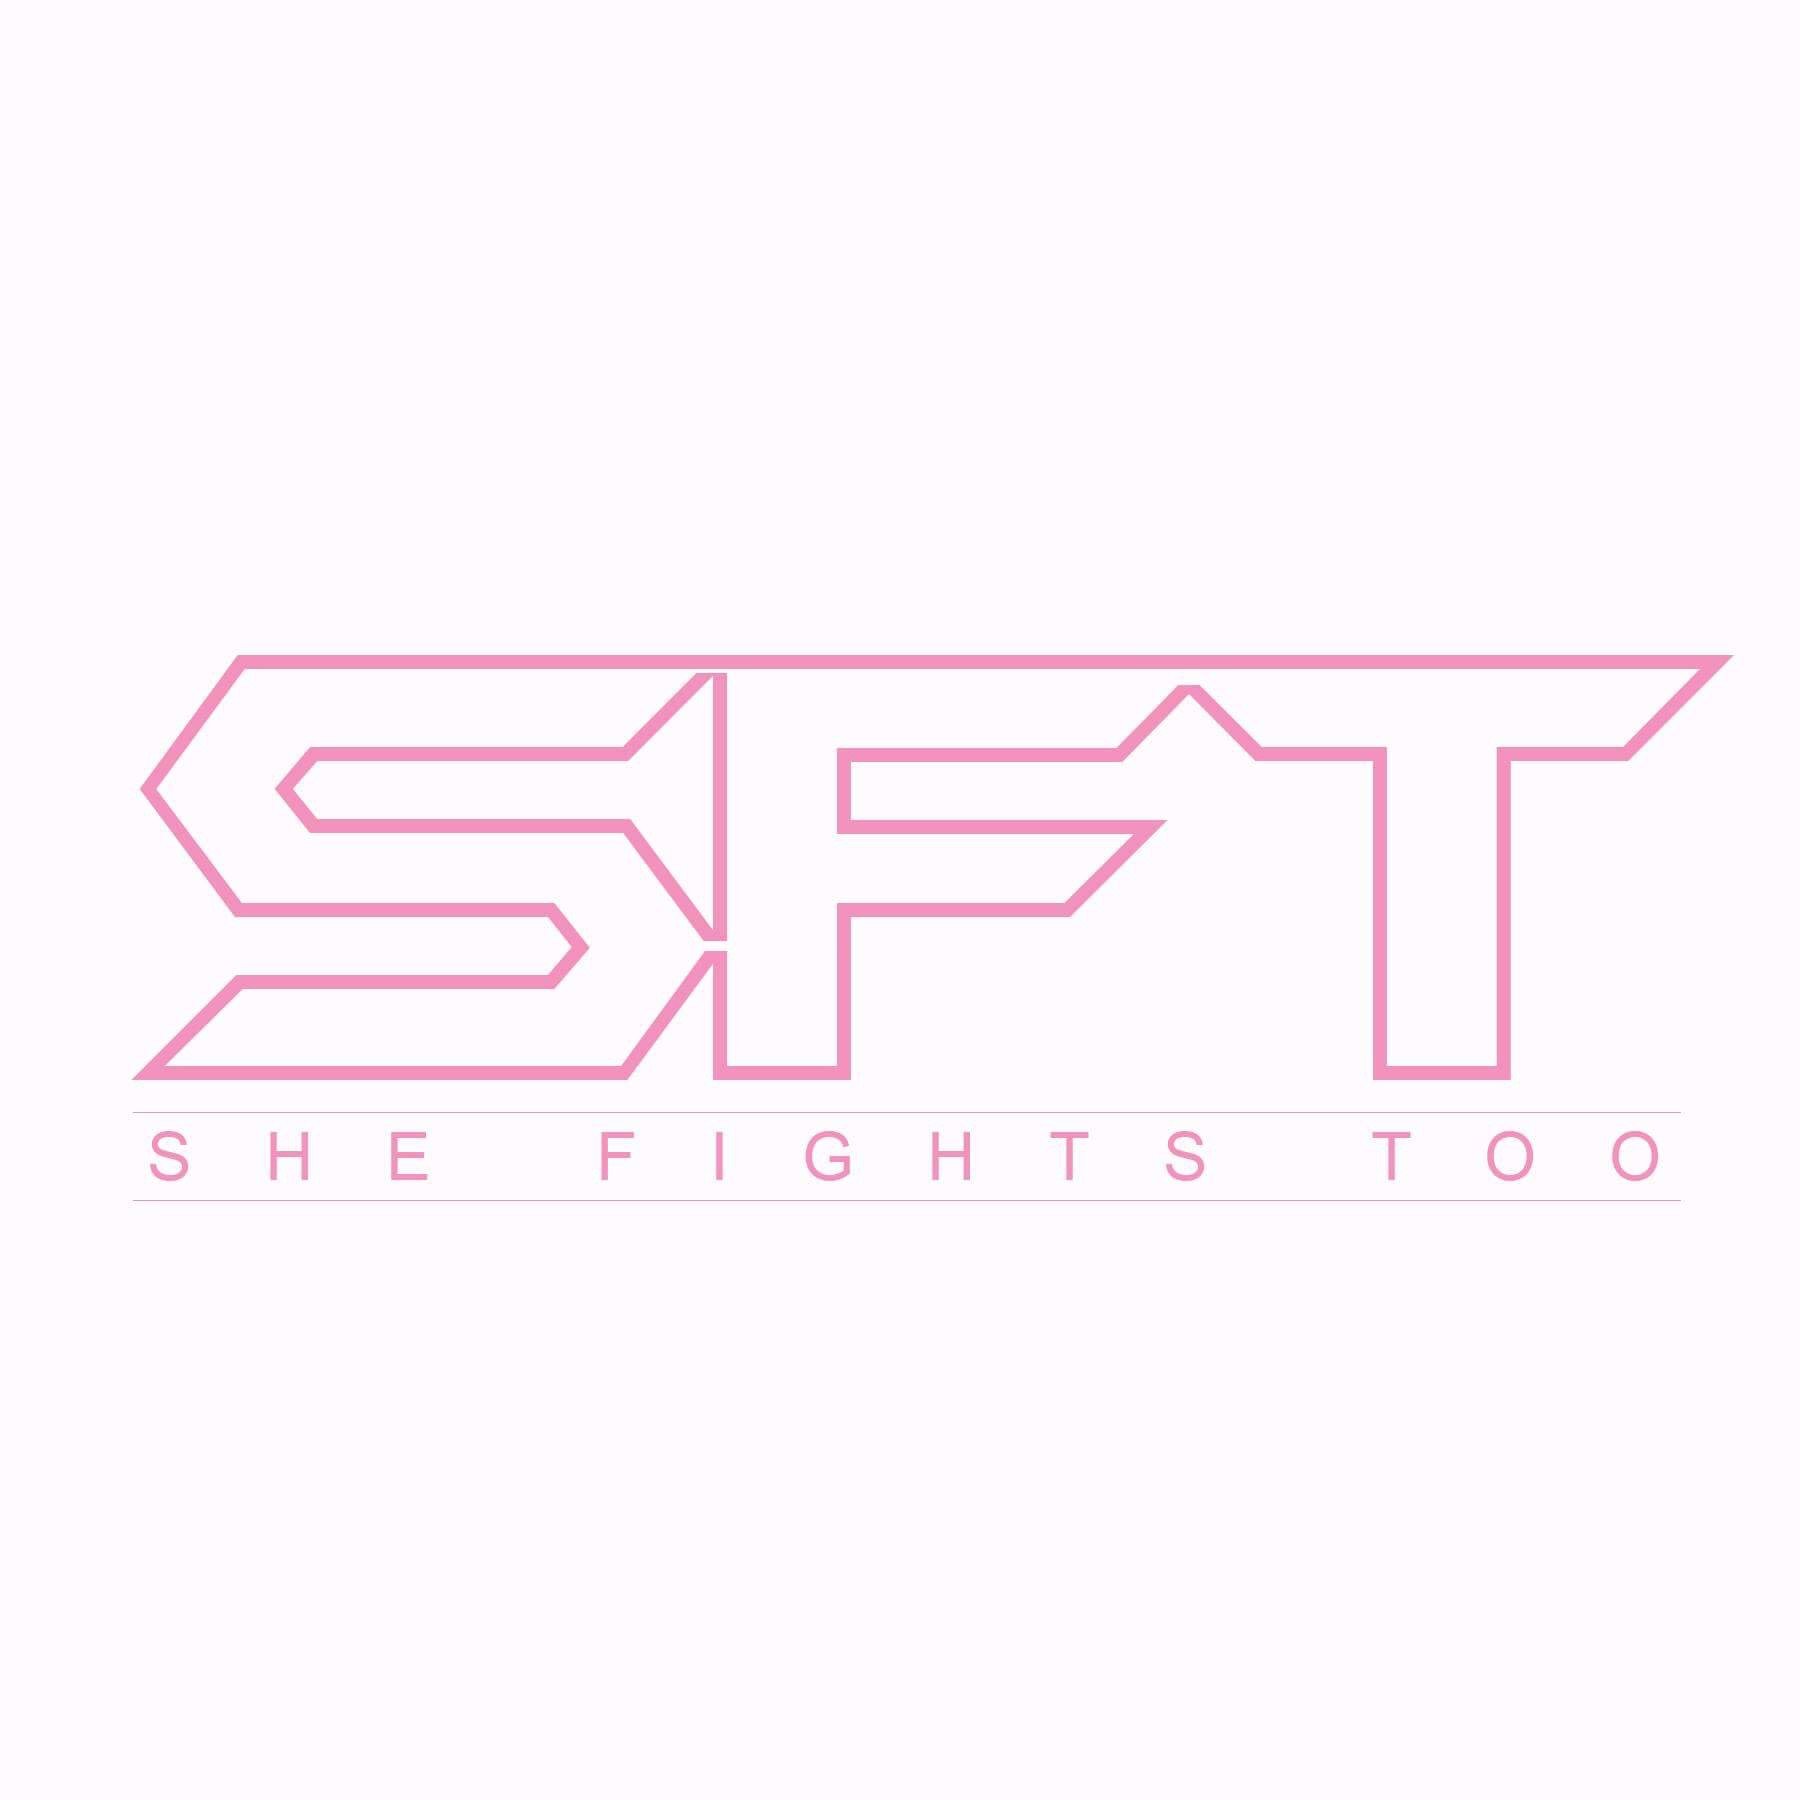 She Fights Too